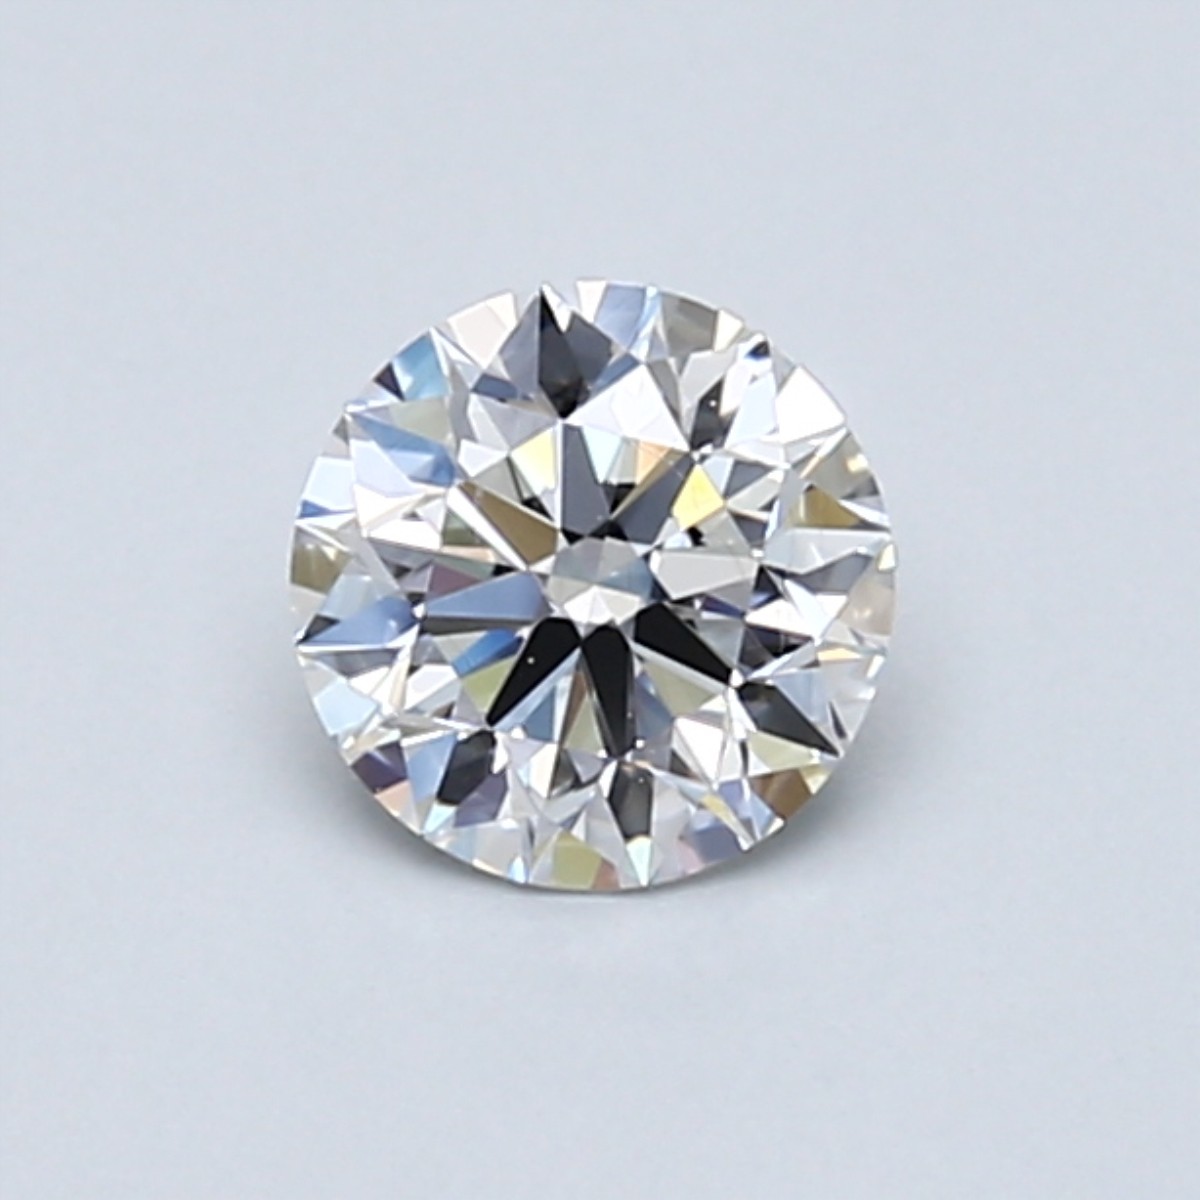 Round 0.61 Carat E Color SI1 Clarity For Sale